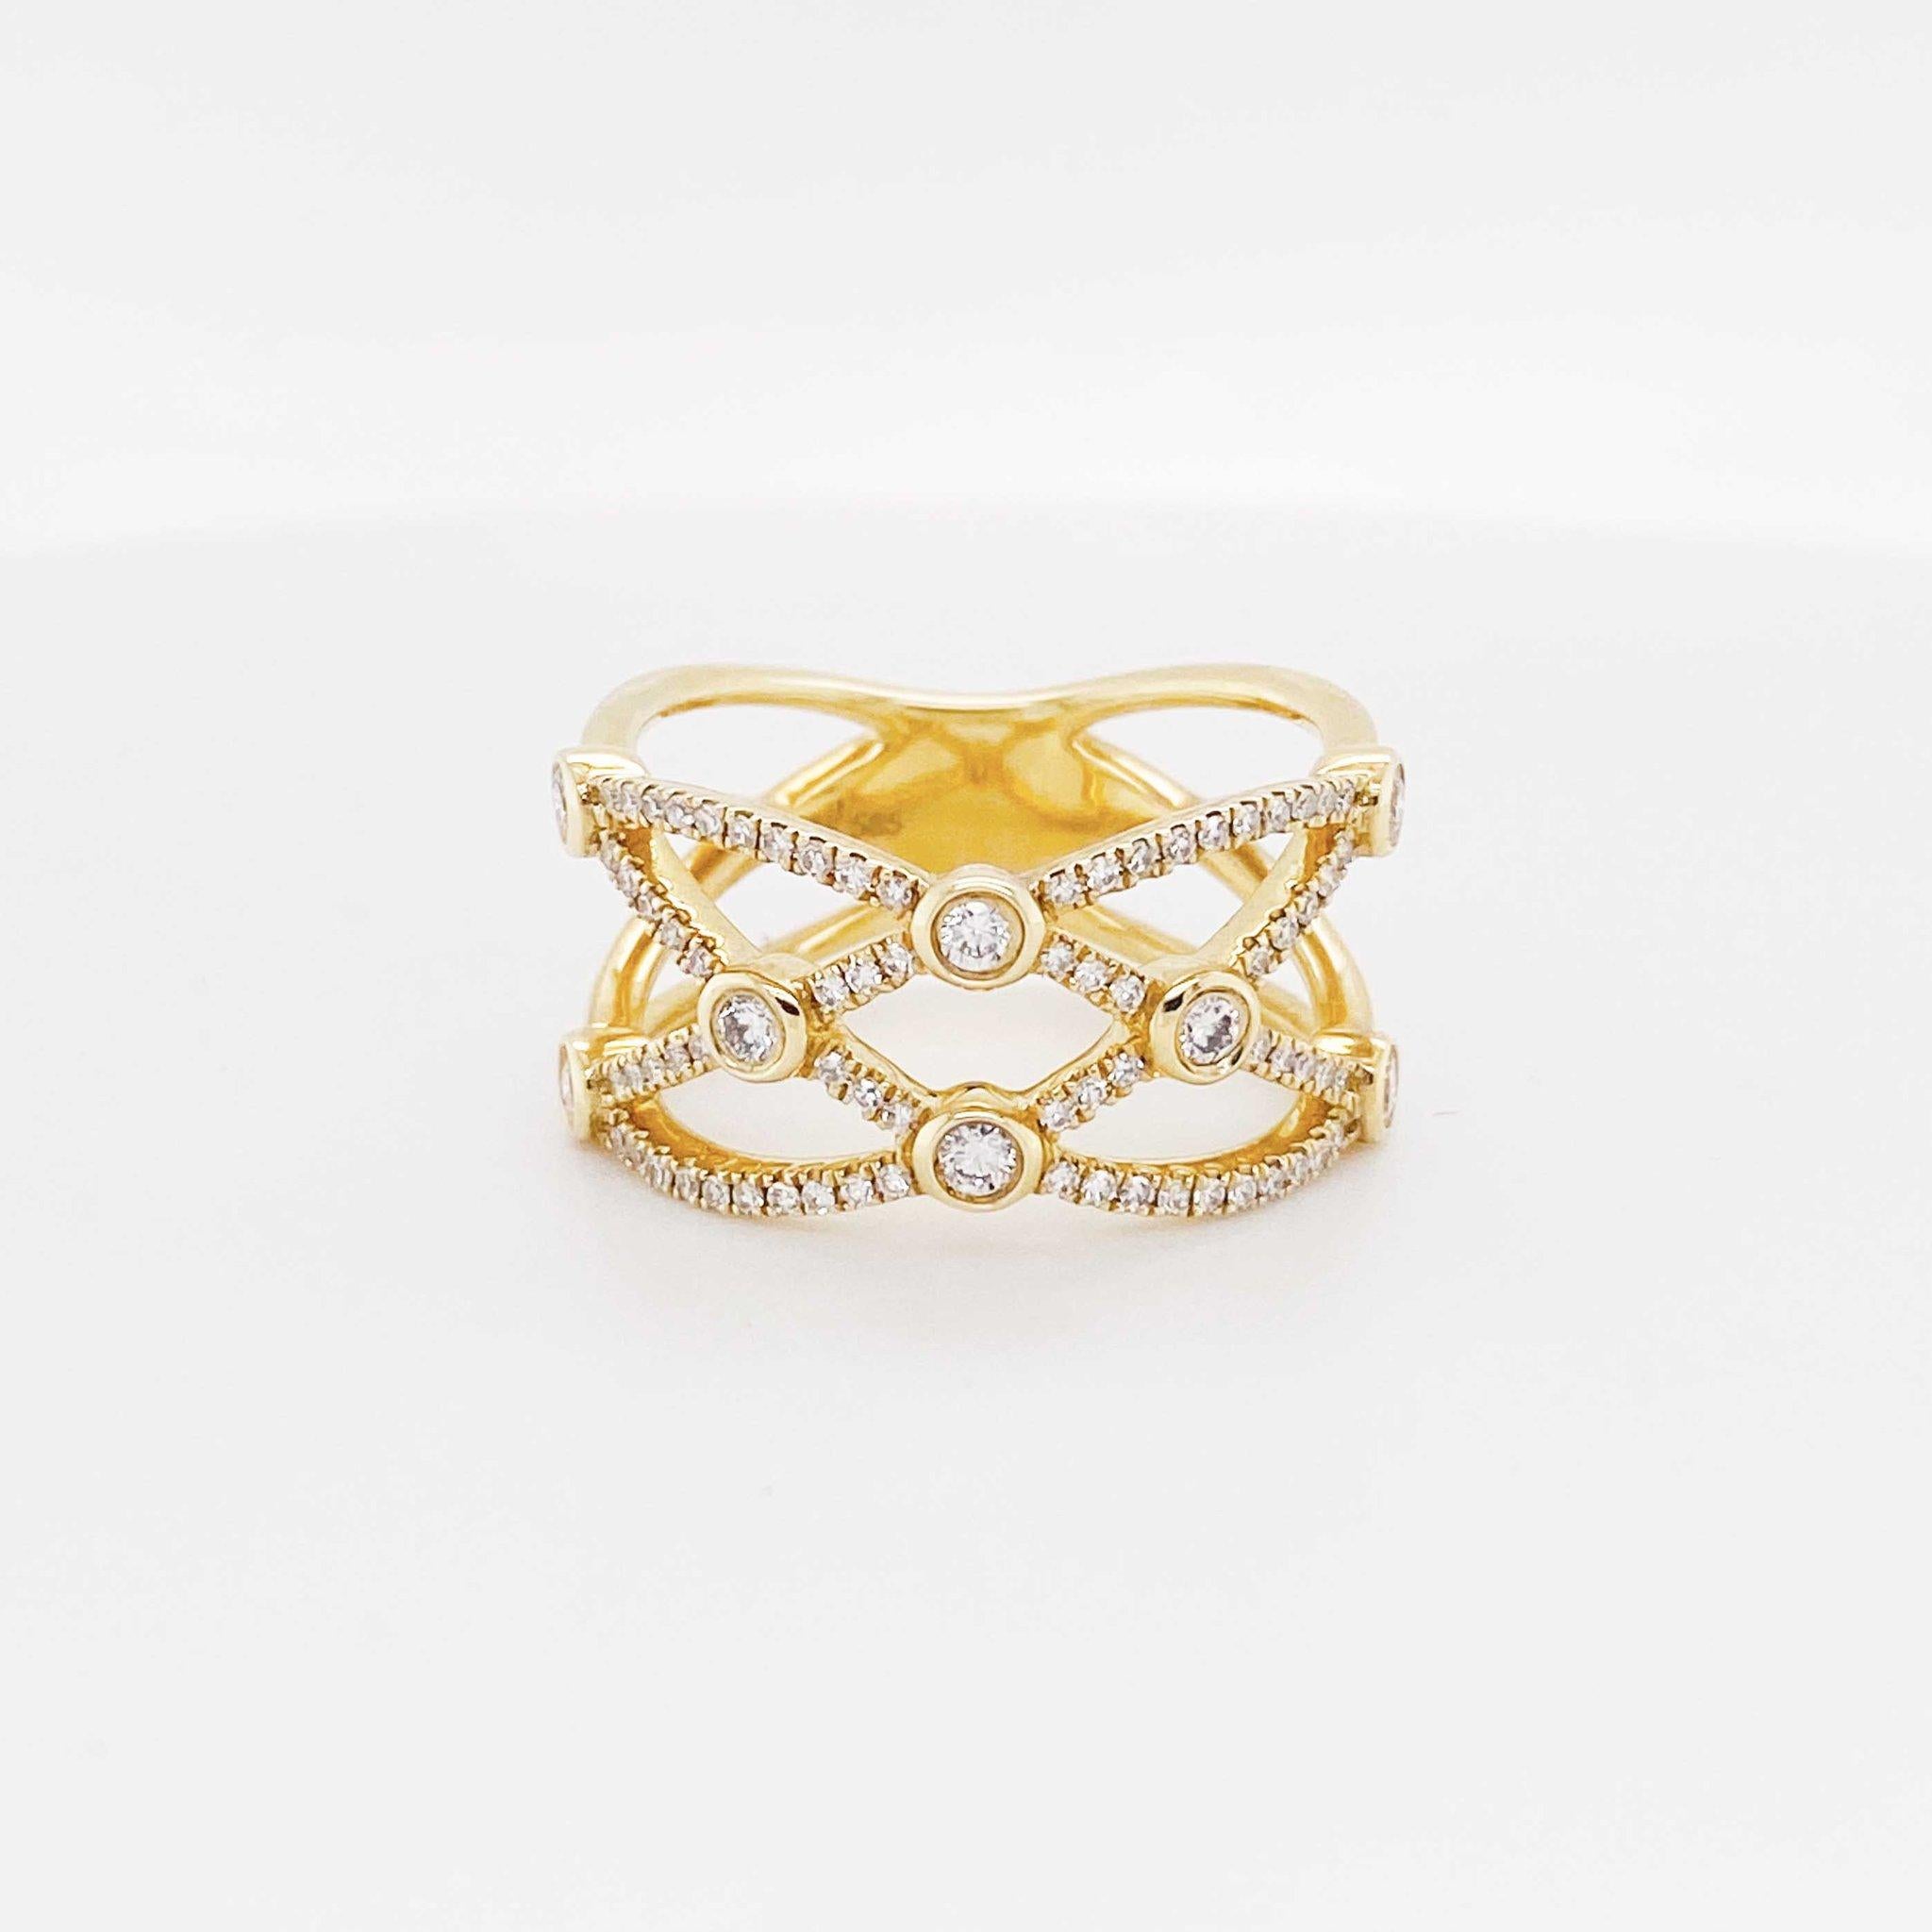 This weaved diamond band is exciting and trendy!  Encrusted with over 75 diamonds this band really sparkles and shines!  The bright 14 karat yellow gold and the beautifully cut diamonds make for a great presentation and can look great on any